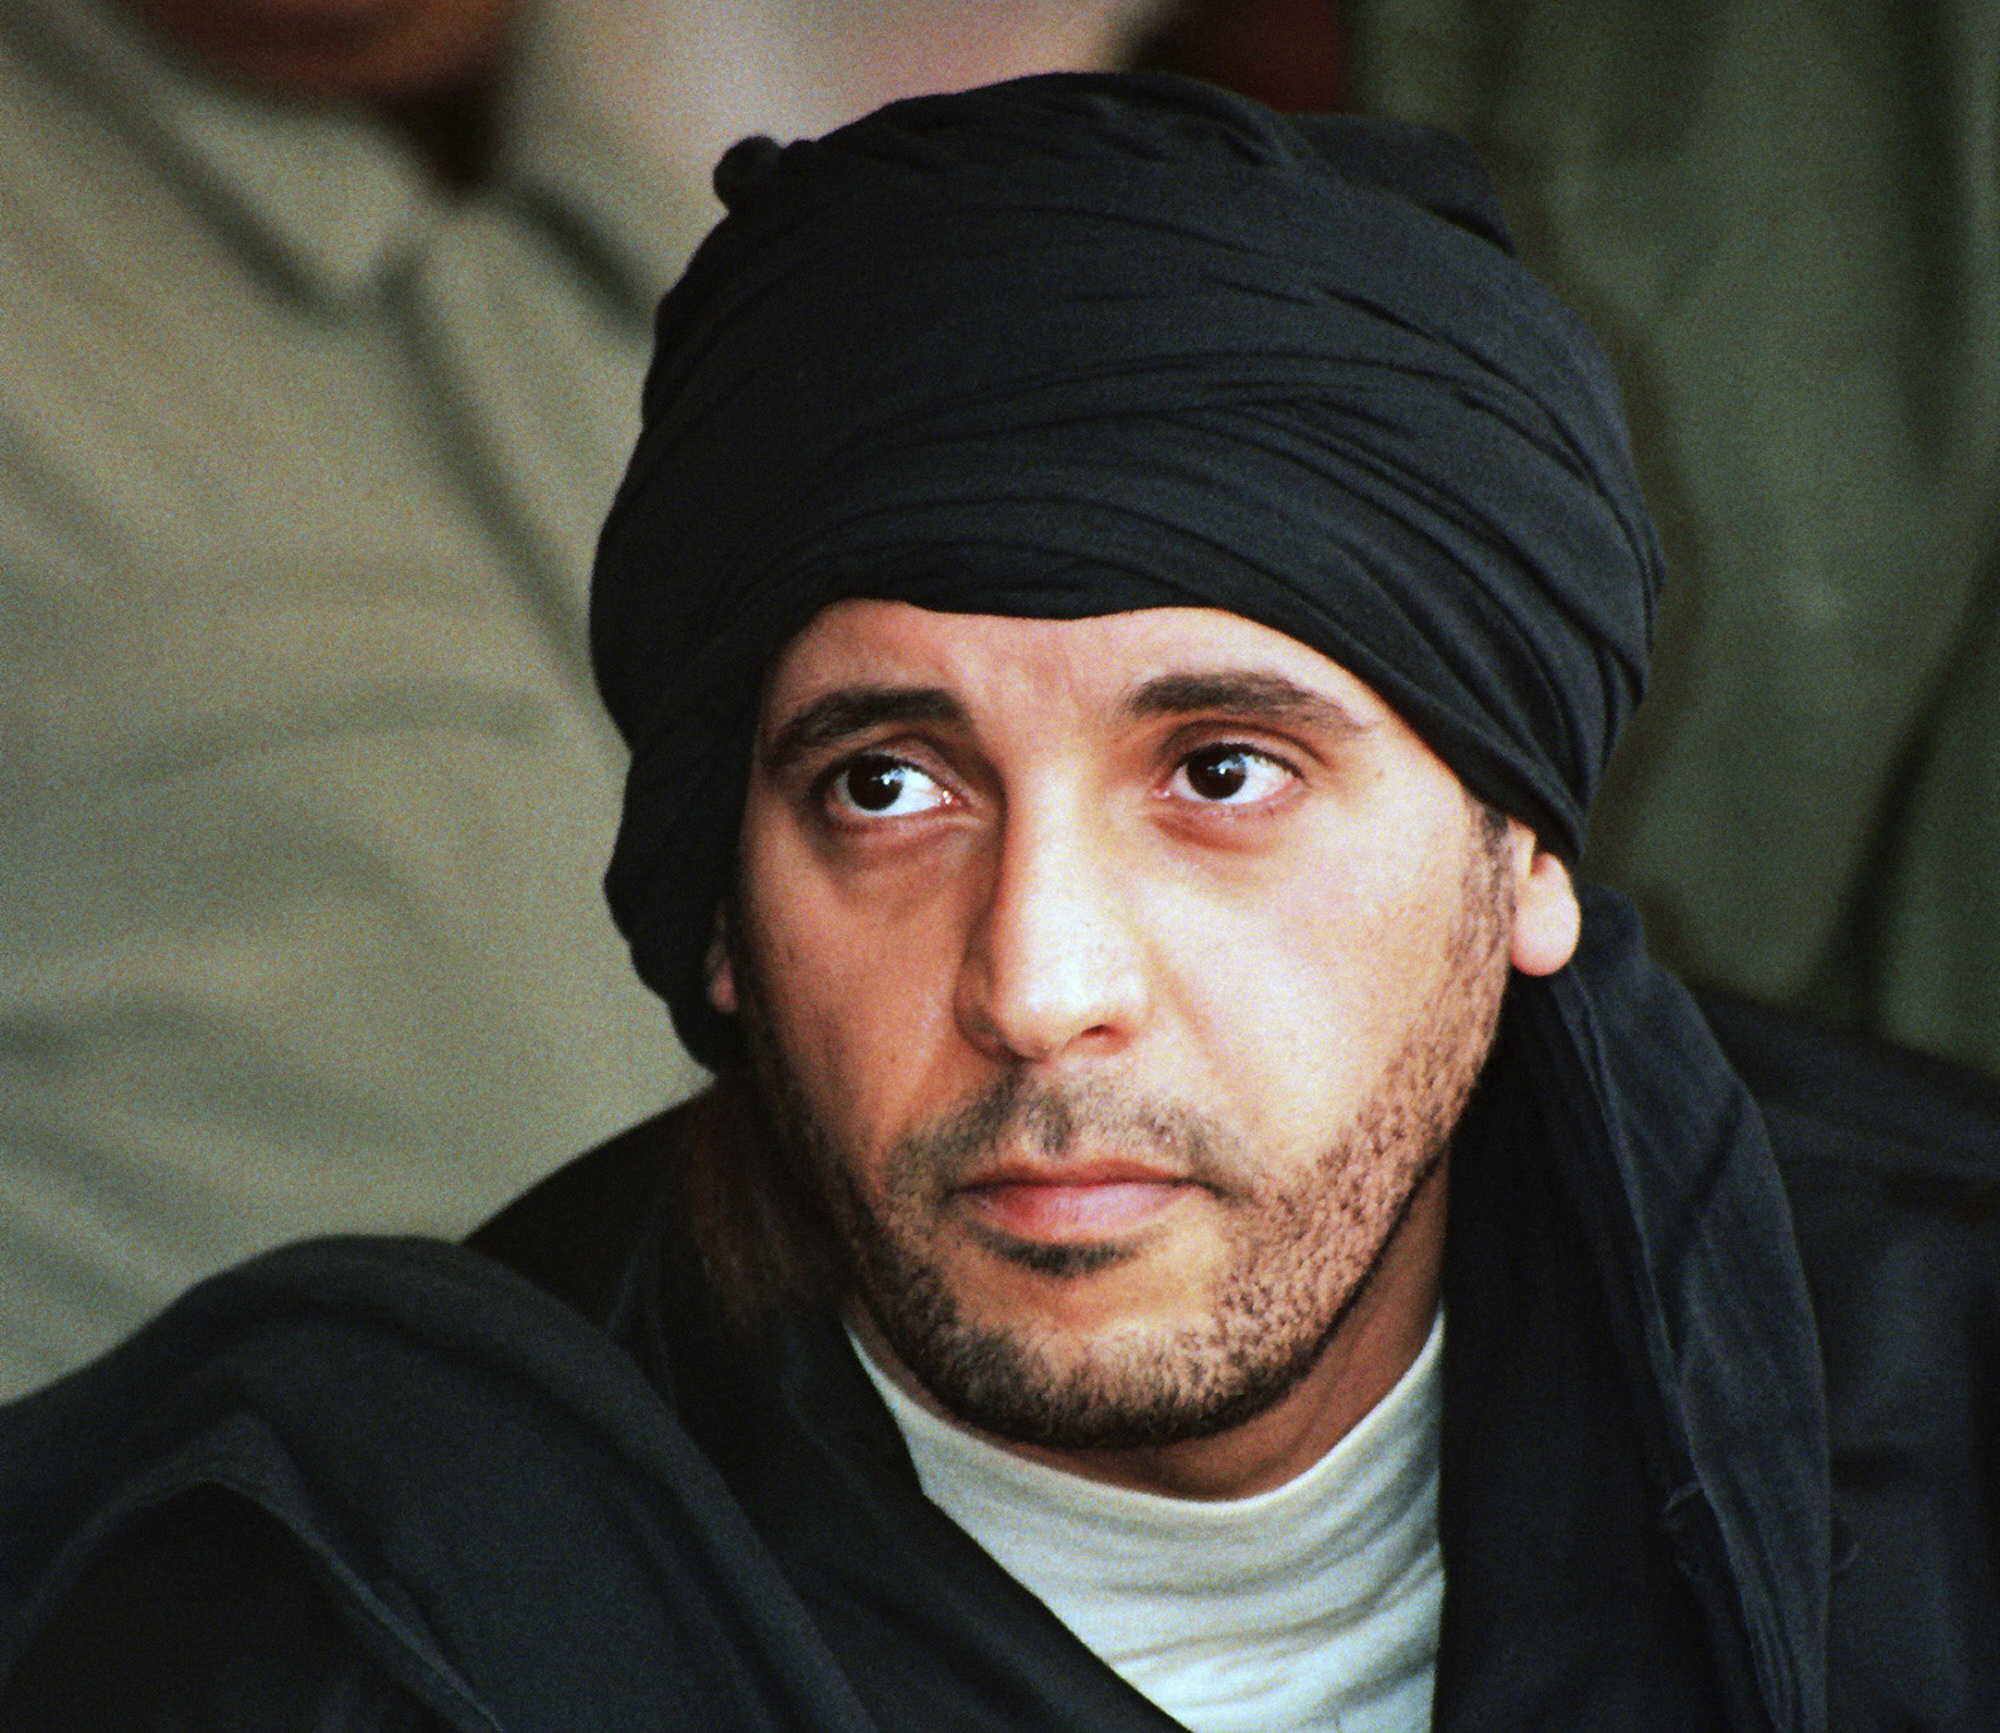 Gaddafi S Son On Hunger Strike To Protest Being Held In Lebanon Without Trial The Times Of Israel